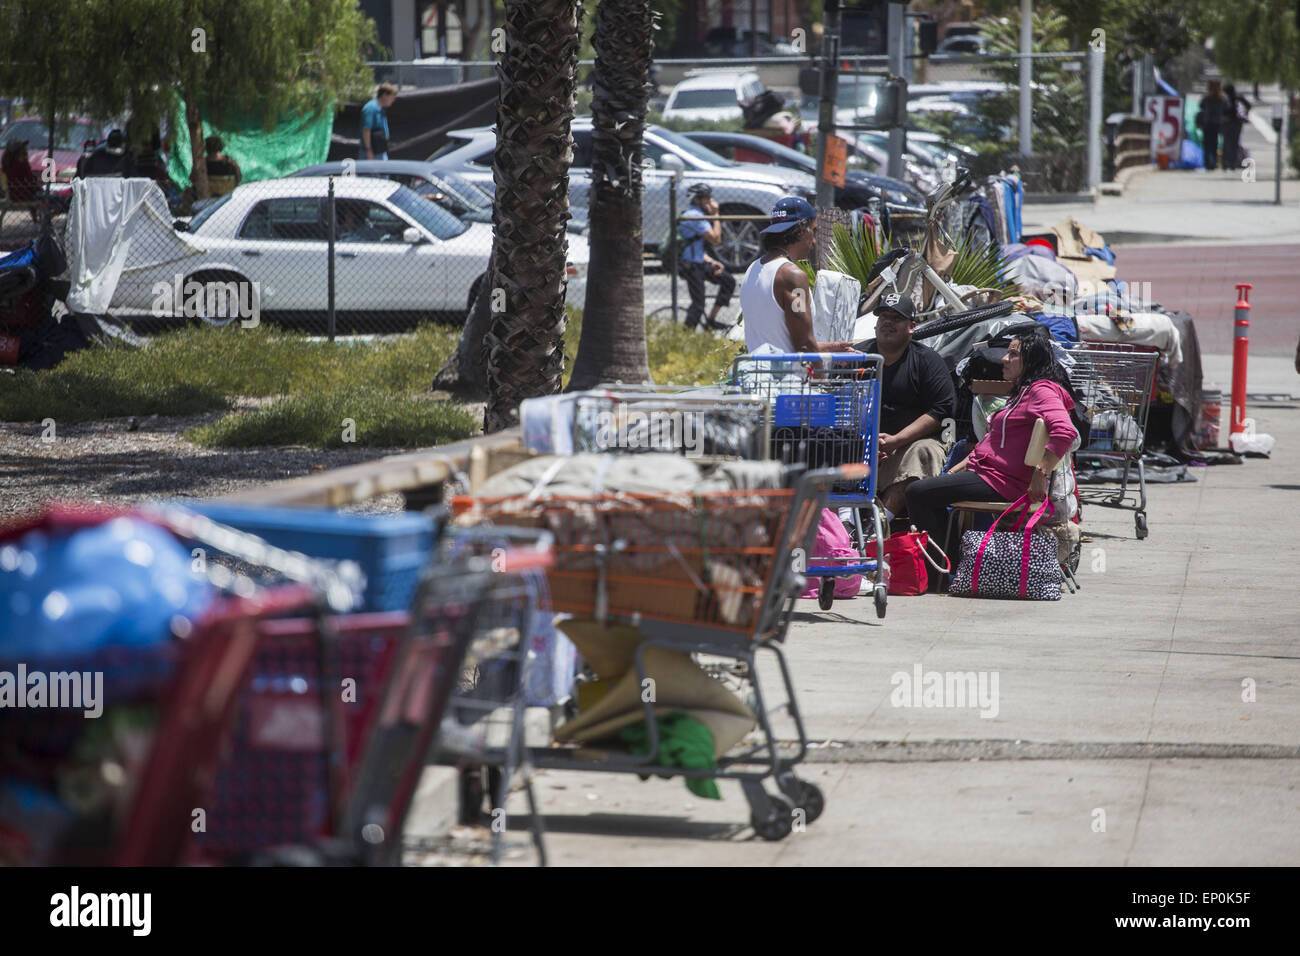 los-angeles-california-usa-12th-may-2015-homeless-people-are-seen-EP0K5F.jpg